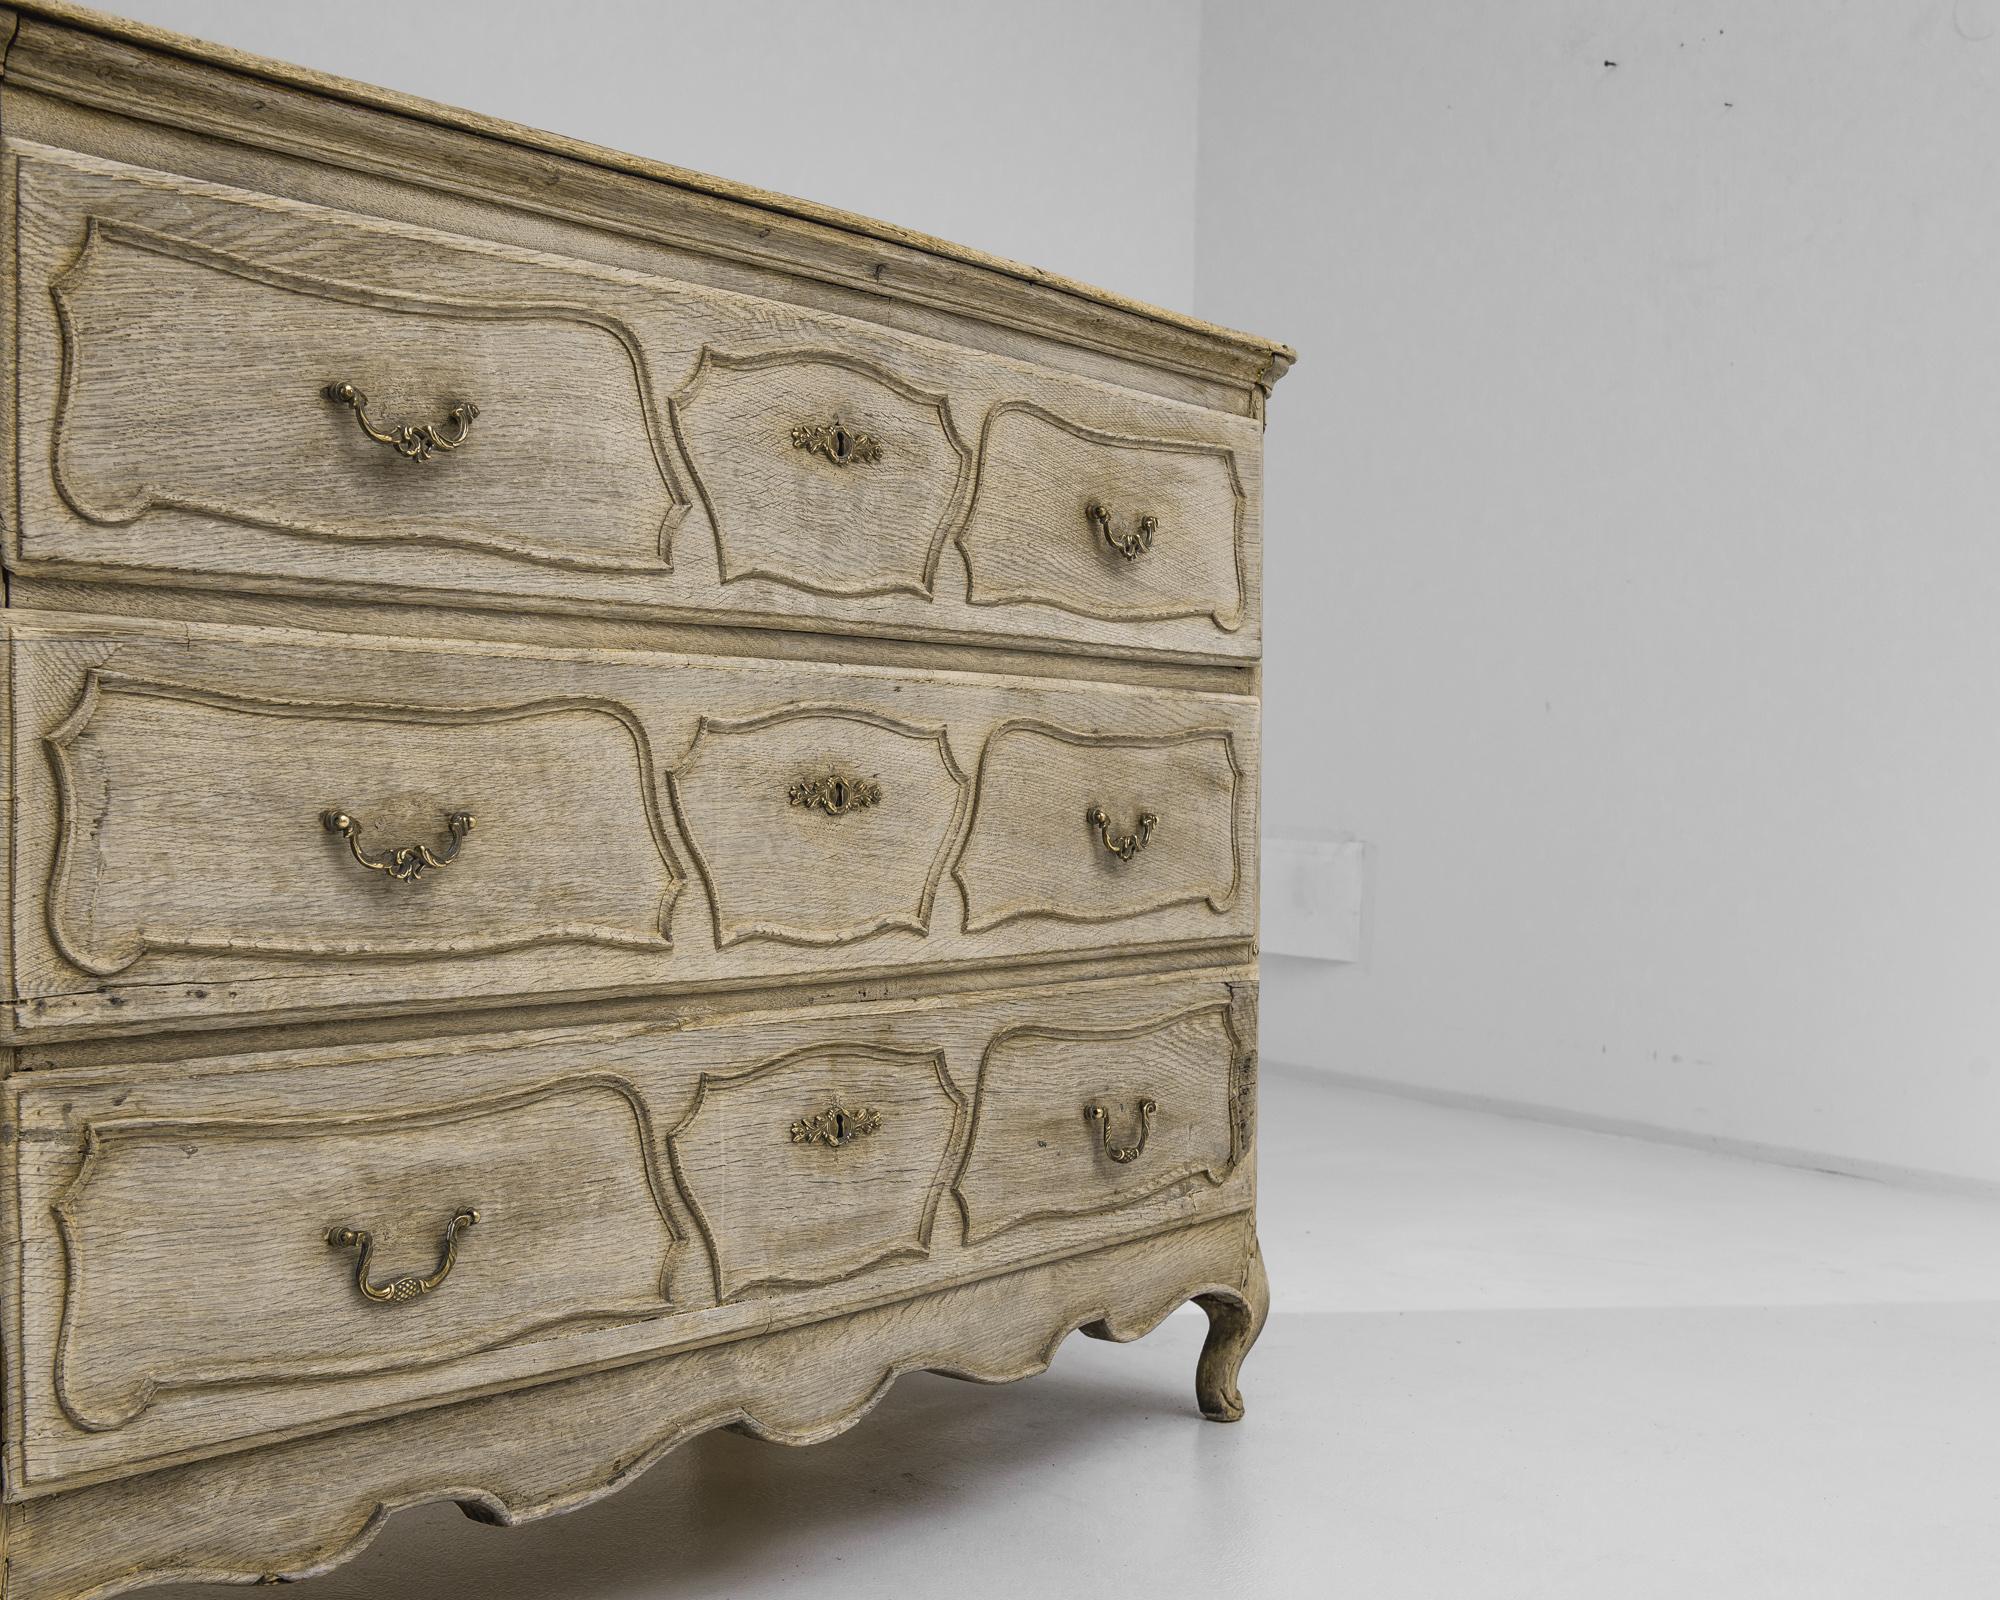 1820s French Oak Chest of Drawers 2